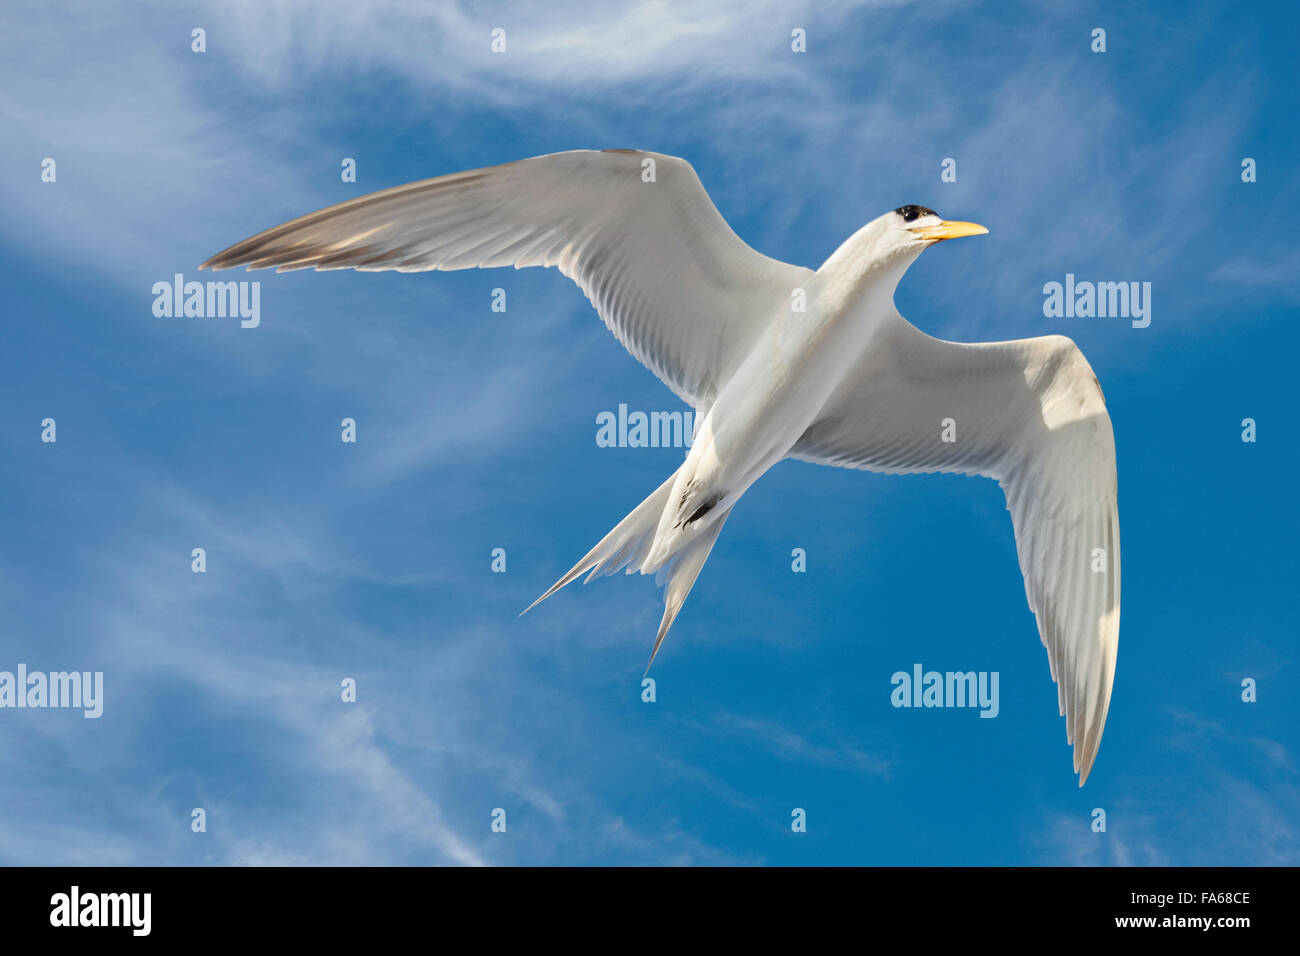 Low angle view of a Crested Tern flying Stock Photo